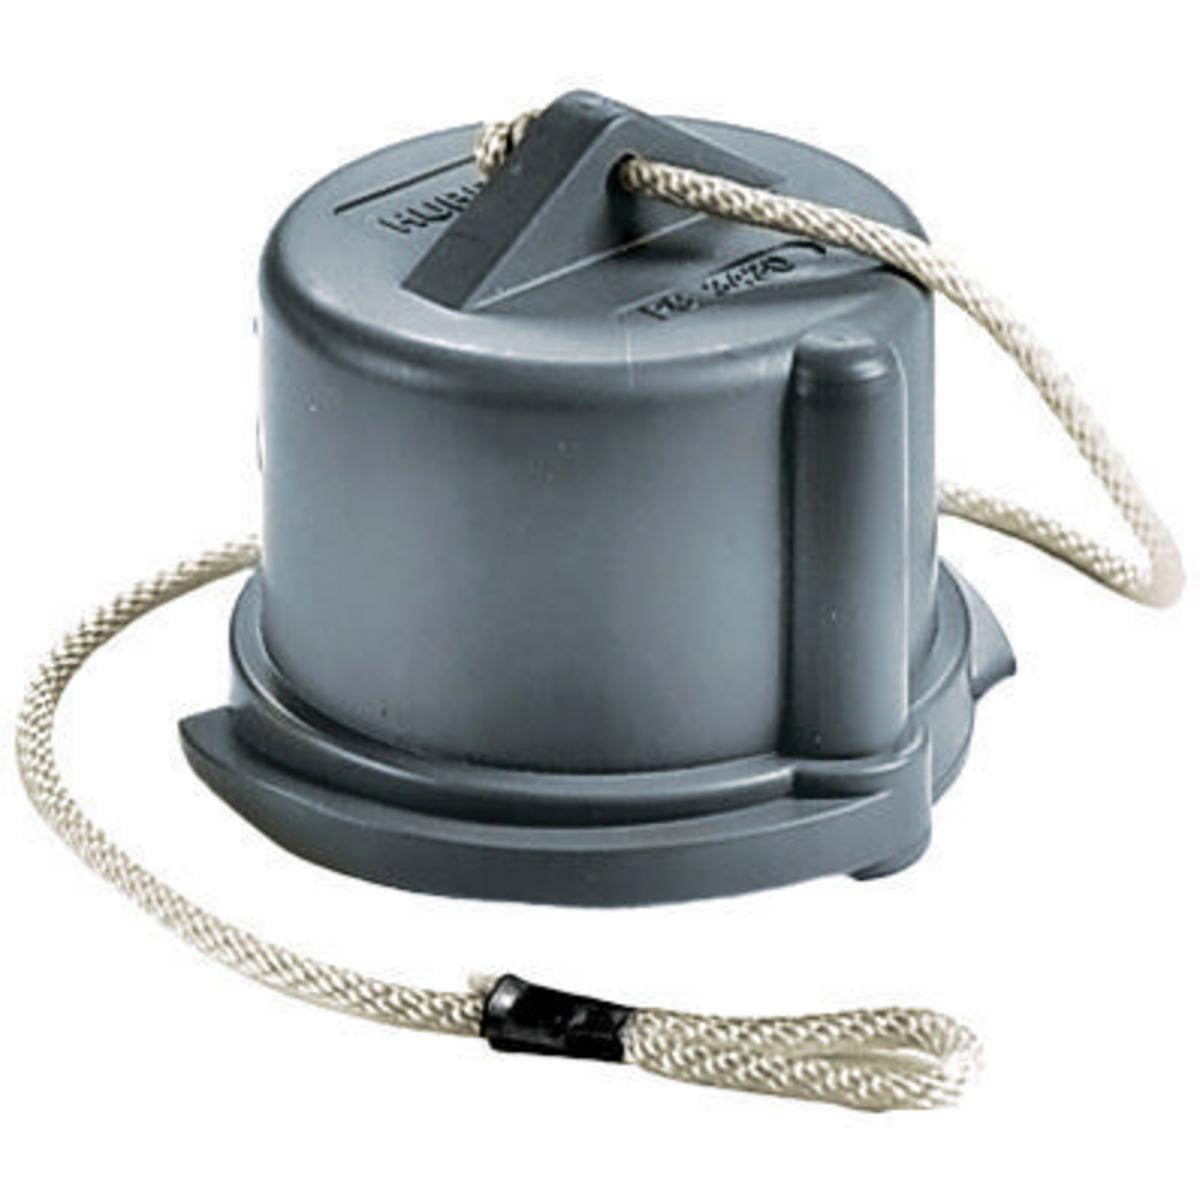 Hubbell PC320 Heavy Duty Products, IEC Pin and Sleeve Devices, Industrial Grade, Accessories, Male Closure Cap, For 20A 3- Wire, Gray Non-Metallic  ; Cap assemblies provide watertight sealing ; Manufactured with non-metallic material ; Watertight